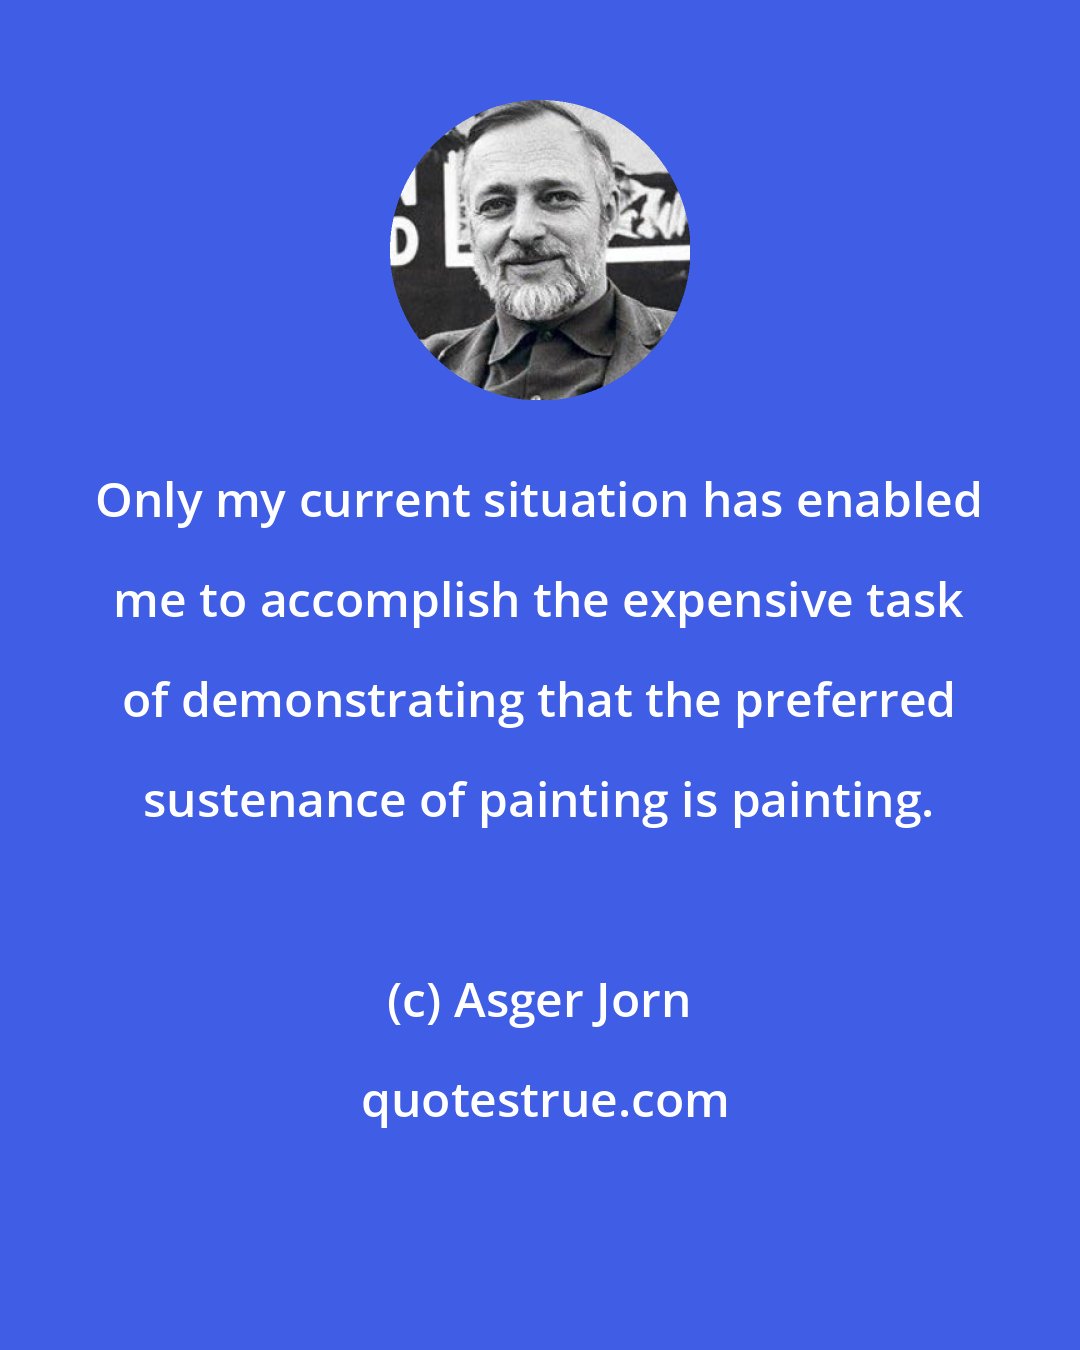 Asger Jorn: Only my current situation has enabled me to accomplish the expensive task of demonstrating that the preferred sustenance of painting is painting.